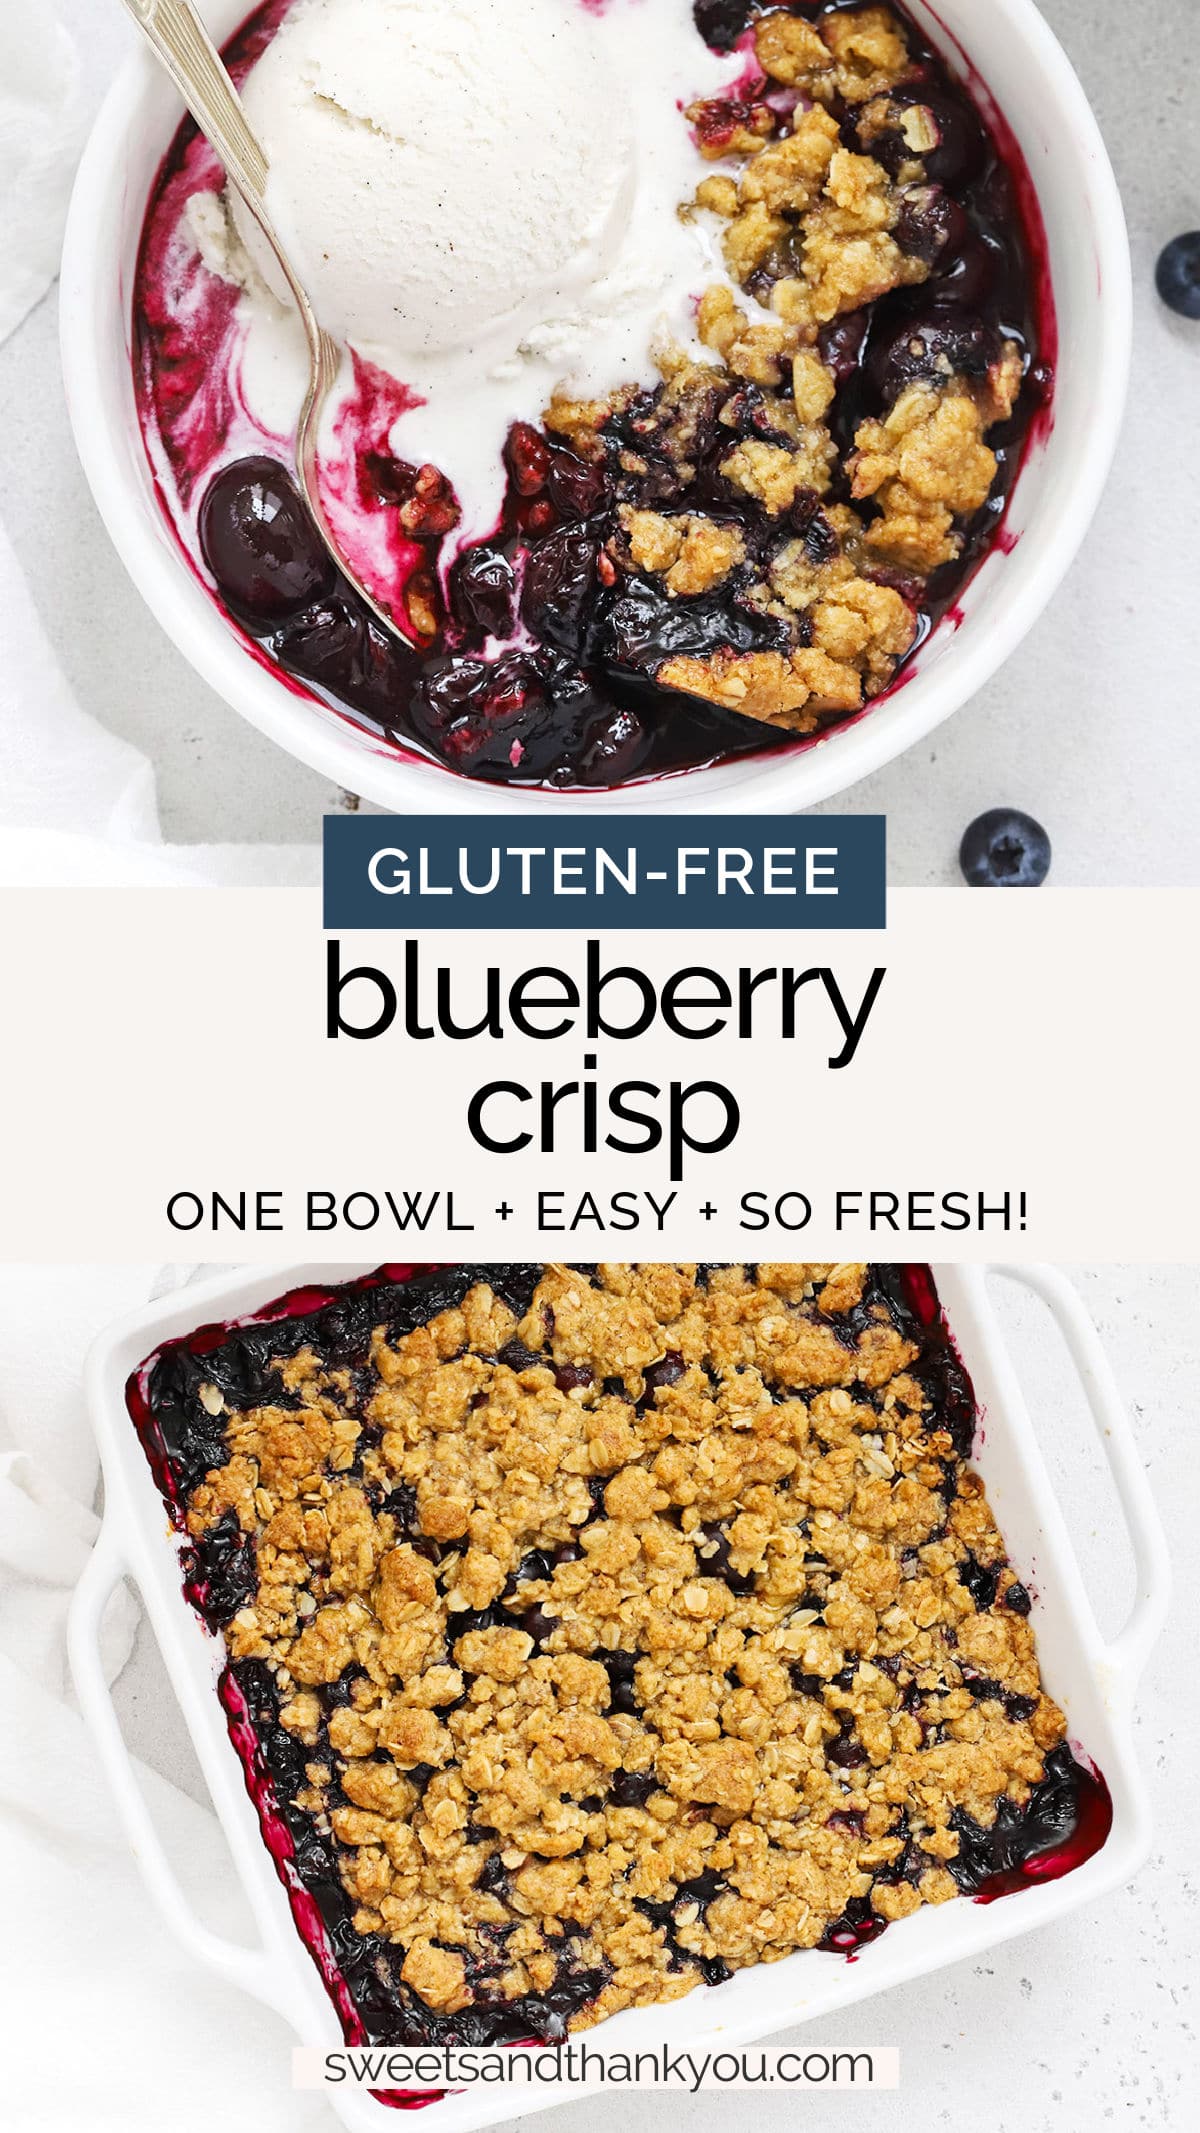 Gluten-Free Blueberry Crisp - This easy blueberry crumble recipe is bursting with fresh blueberry flavor! (You'll love the crispy crumble topping.) // gluten-free vegan blueberry crumble // gluten-free vegan blueberry crisp // easy blueberry crisp // the best blueberry crisp // gluten-free summer dessert // gluten-free 4th of July desserts // gluten-free spring dessert // gluten-free fruit crisp